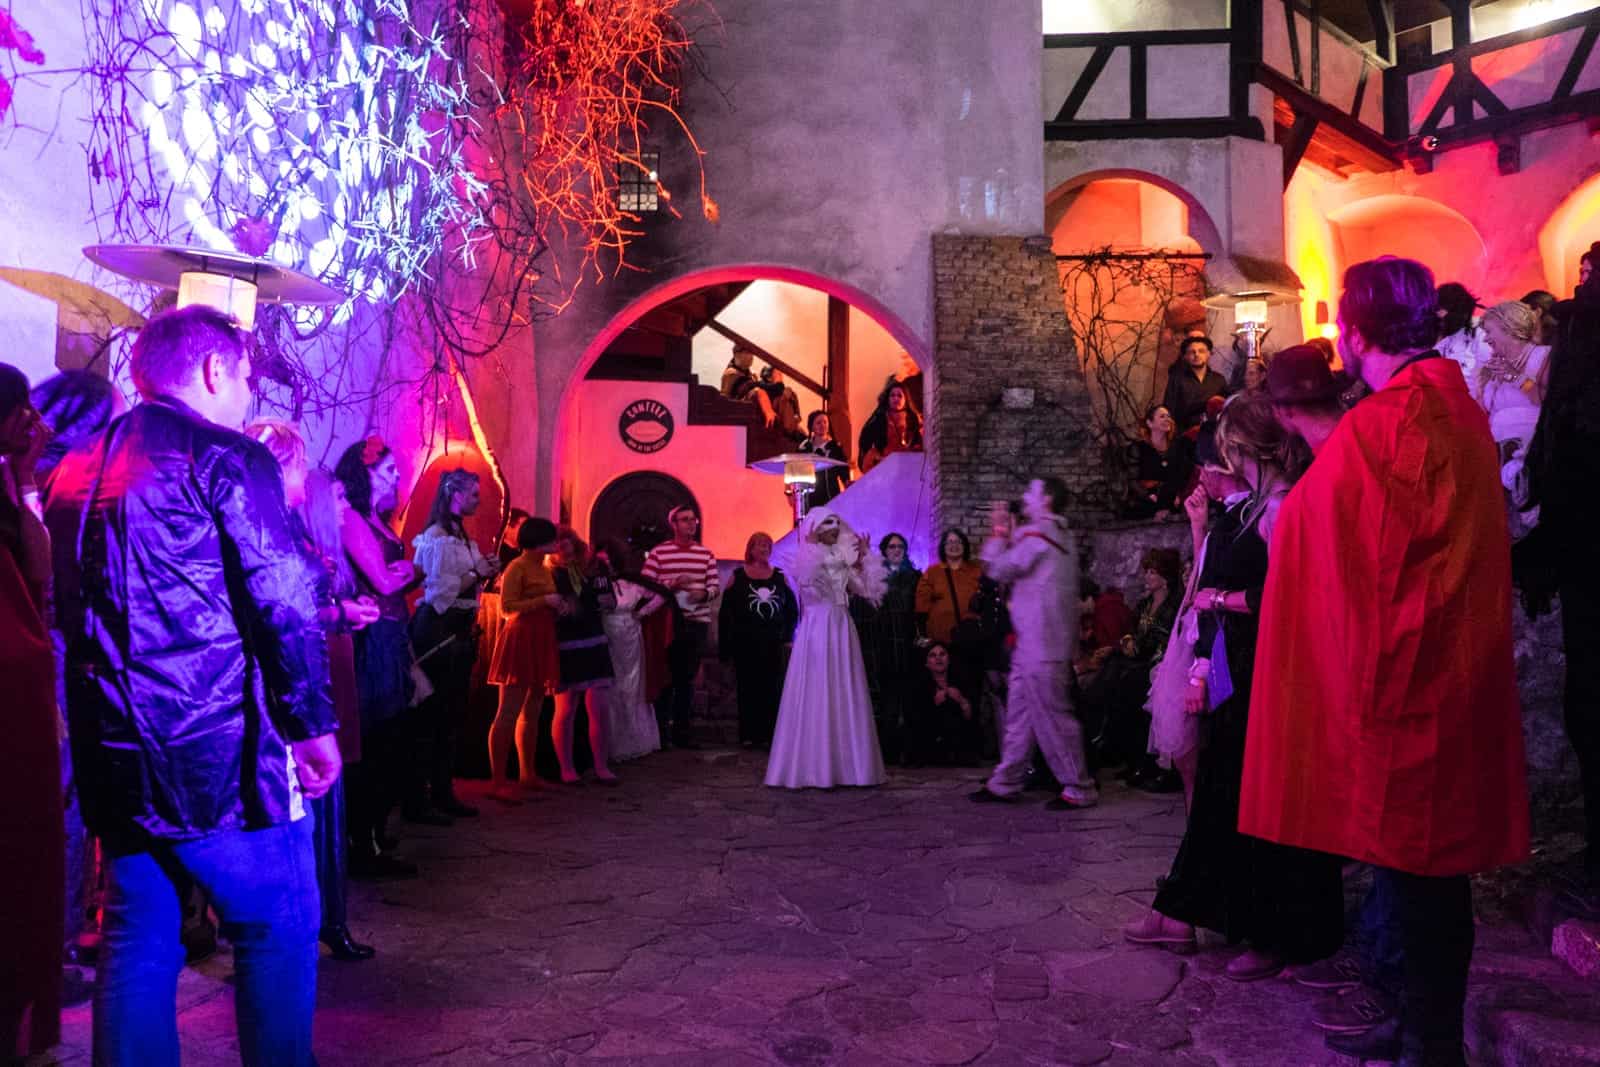 A group of people in Halloween costume form a wide circle in a courtyard in Bran Castle, Transylvania, Romania